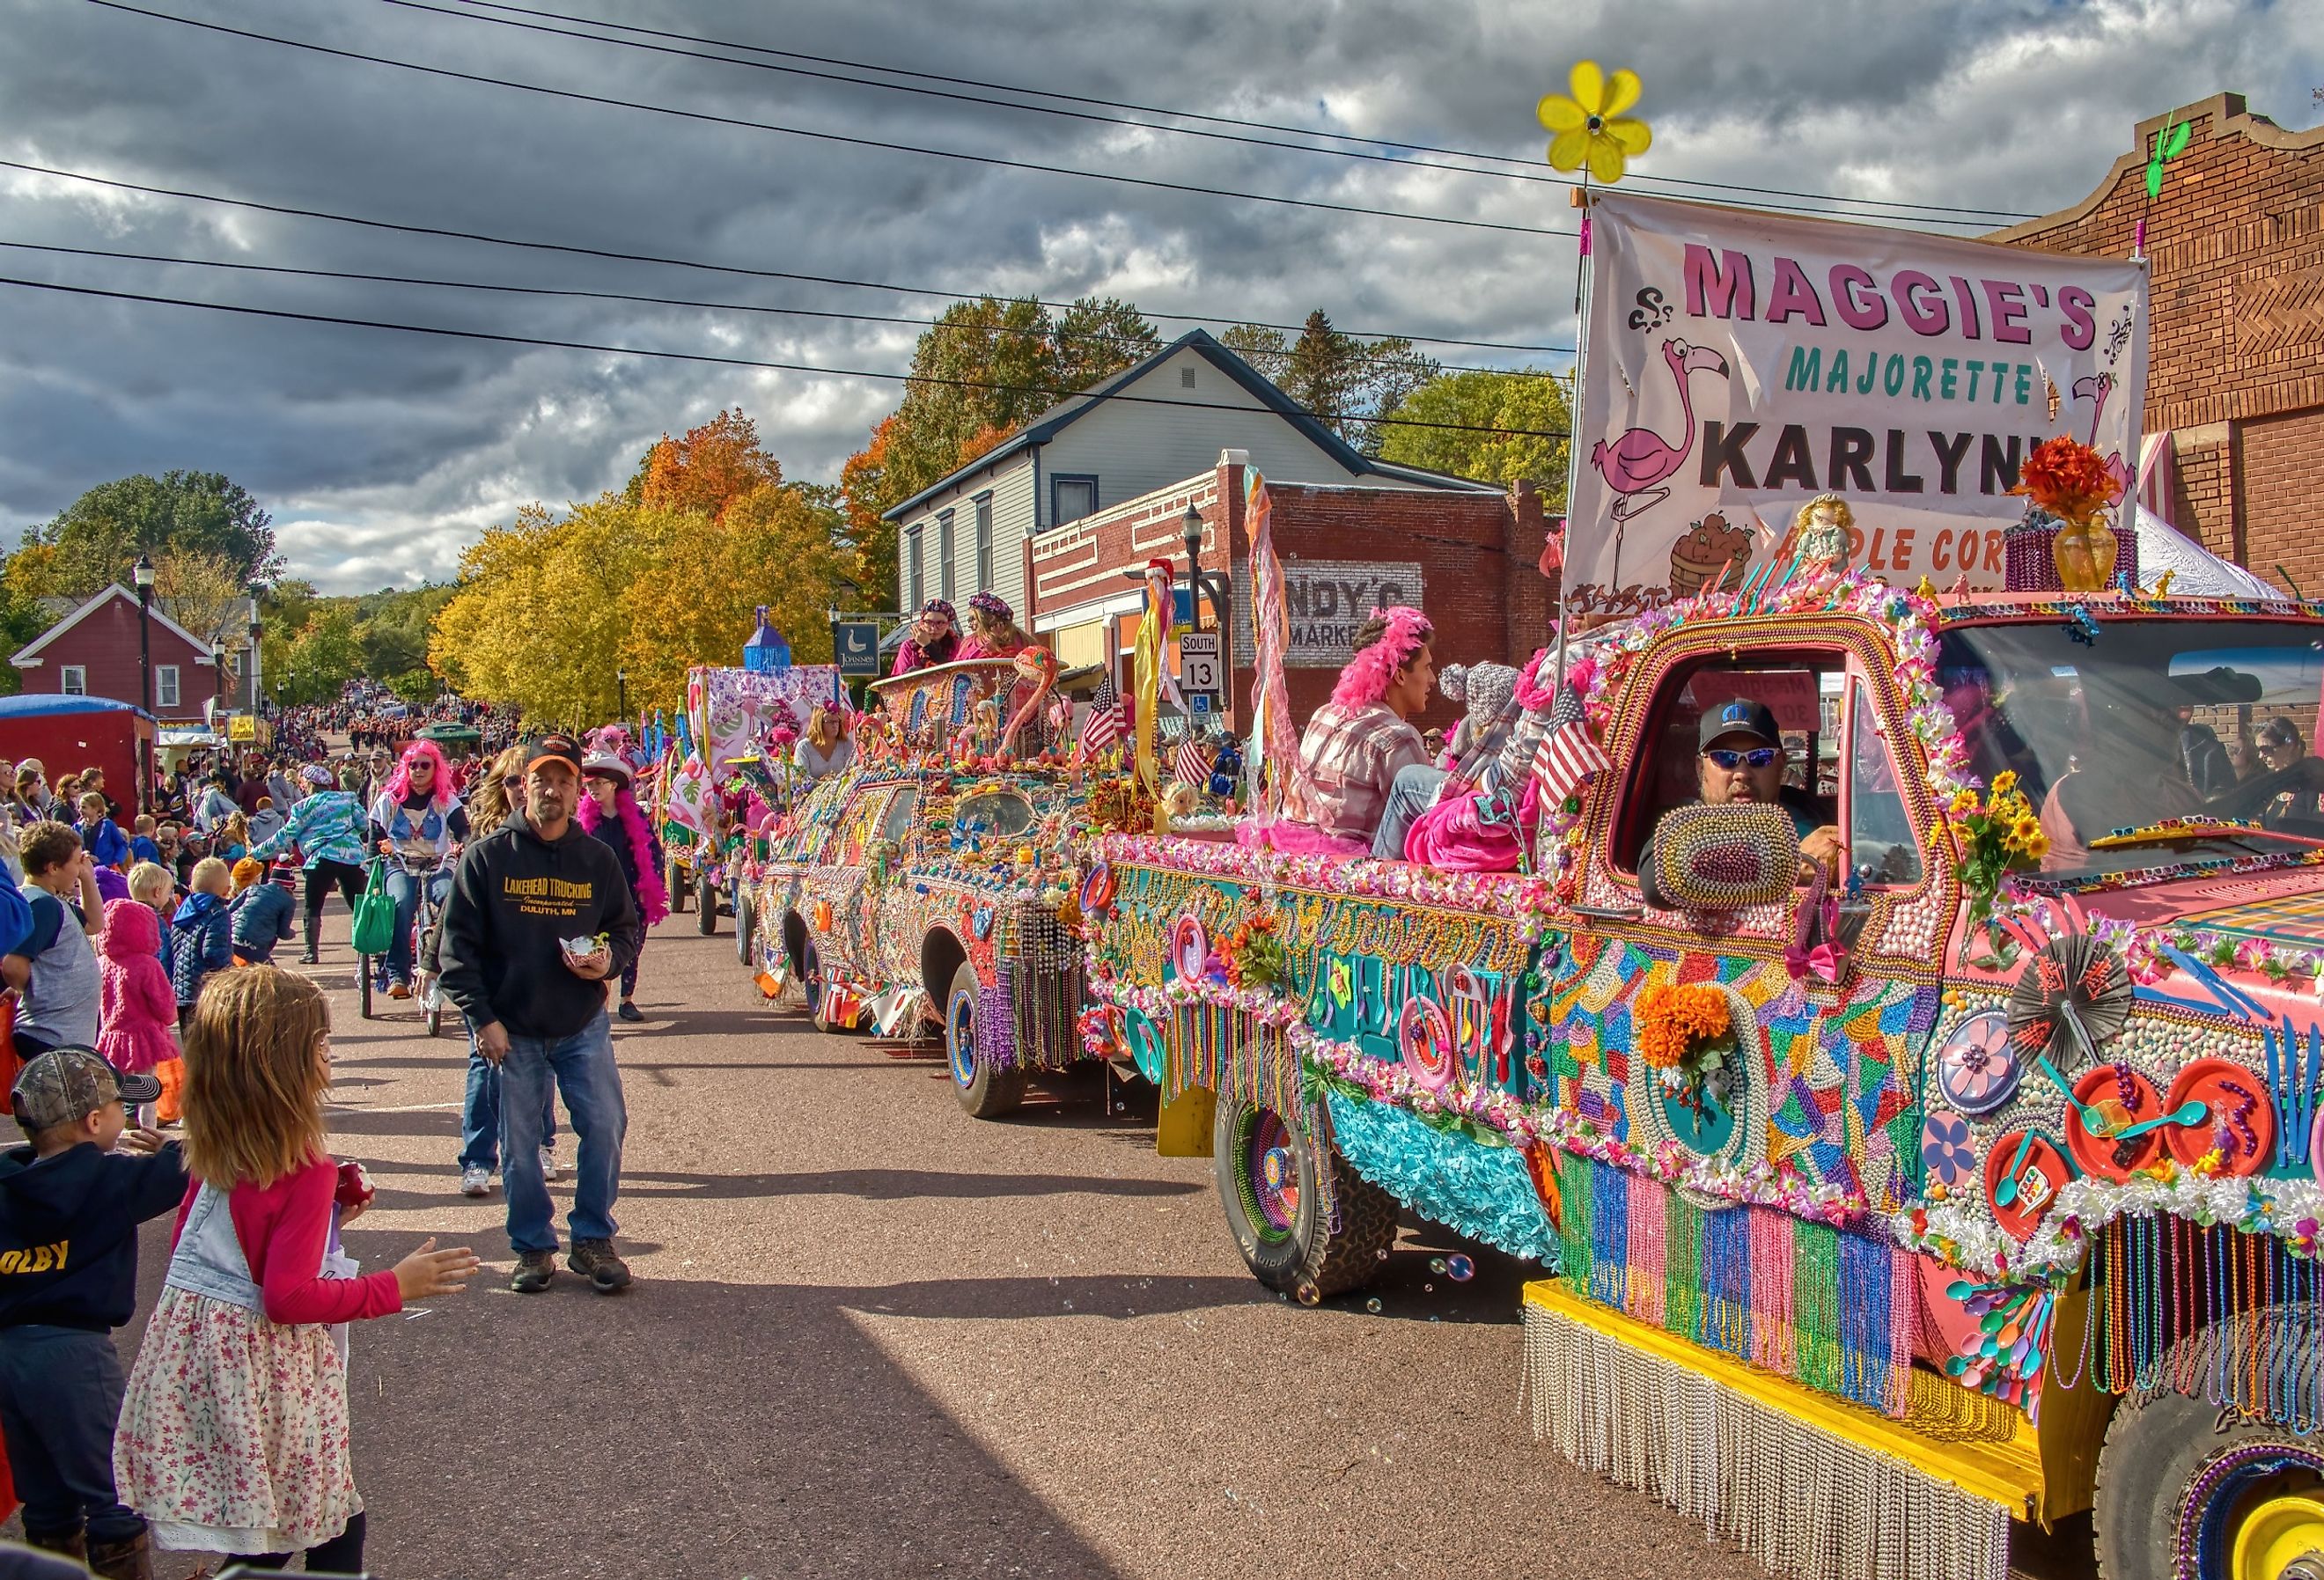 People enjoy the Annual Applefest in Bayfield, Wisconsin. Image credit Jacob Boomsma via Shutterstock